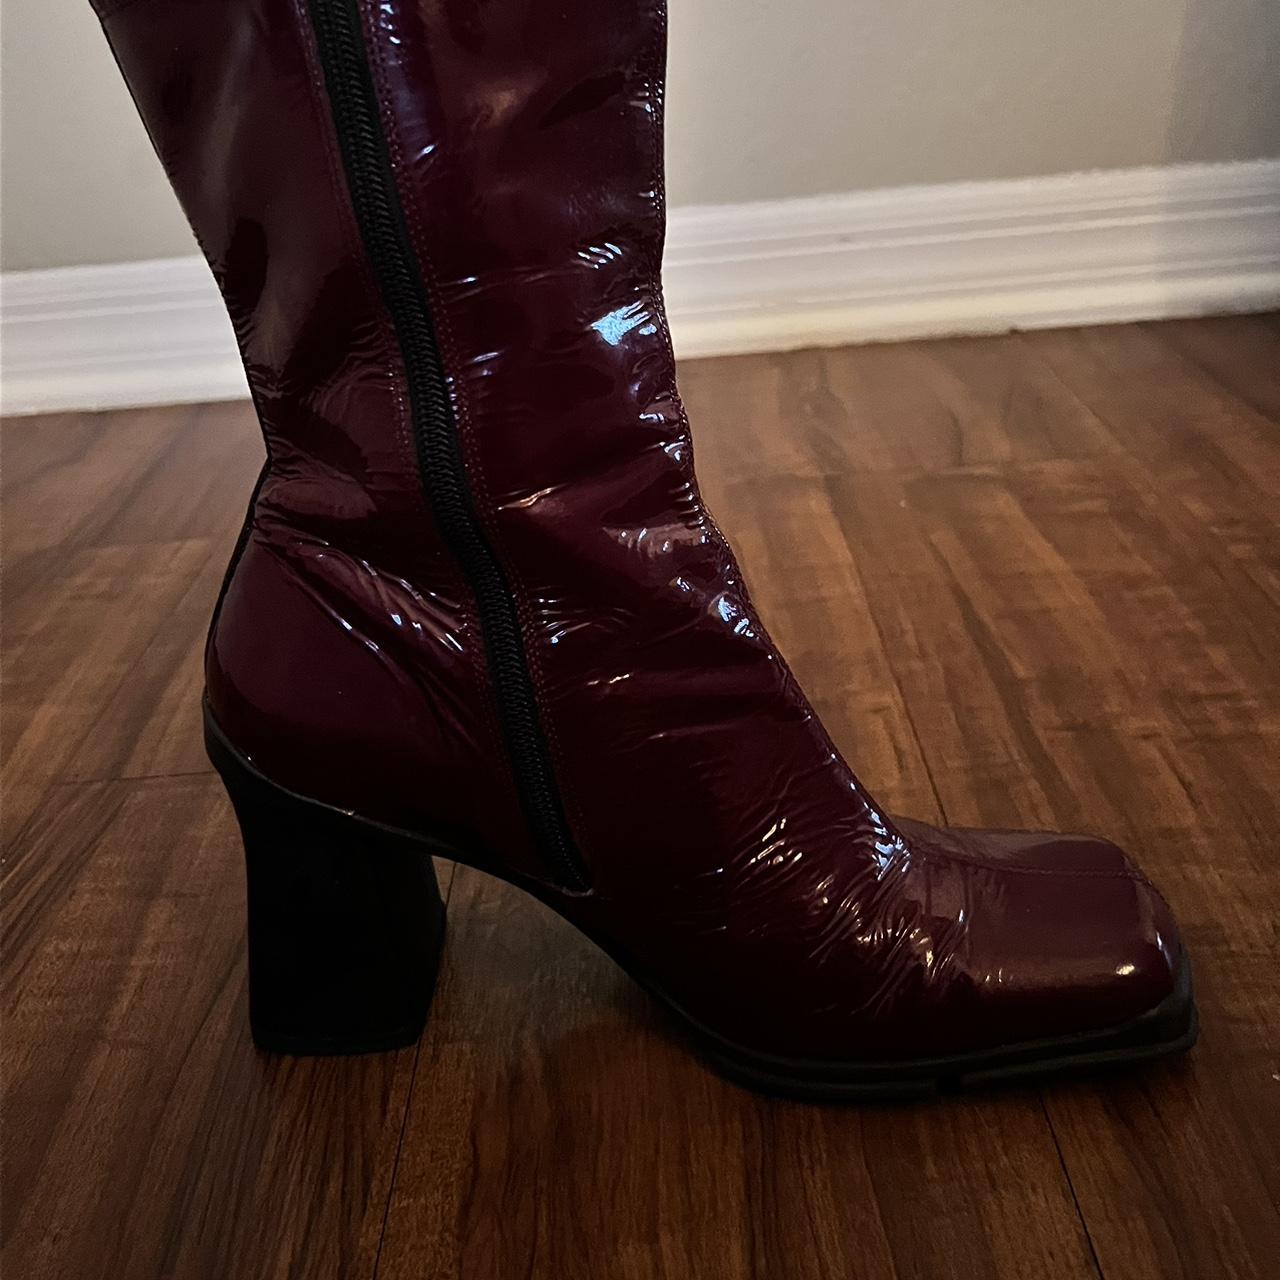 glossy cherry red square toe boots look super cute w... - Depop